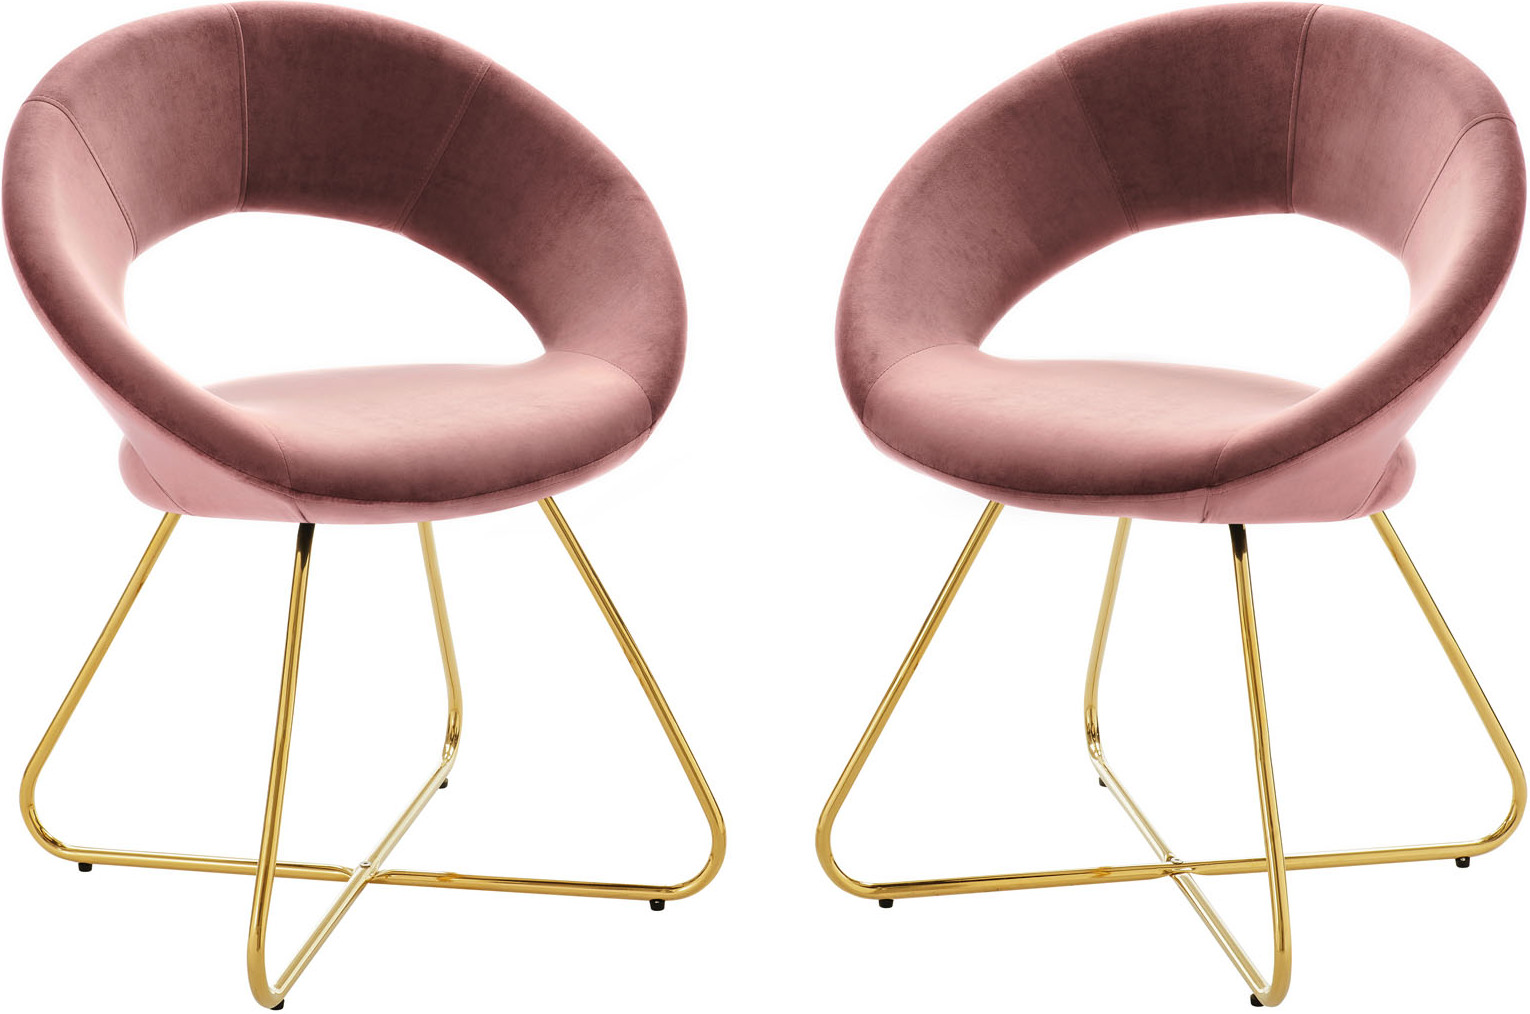 Aura Dining Chair in Blush and Polished Brass (Set of 2)